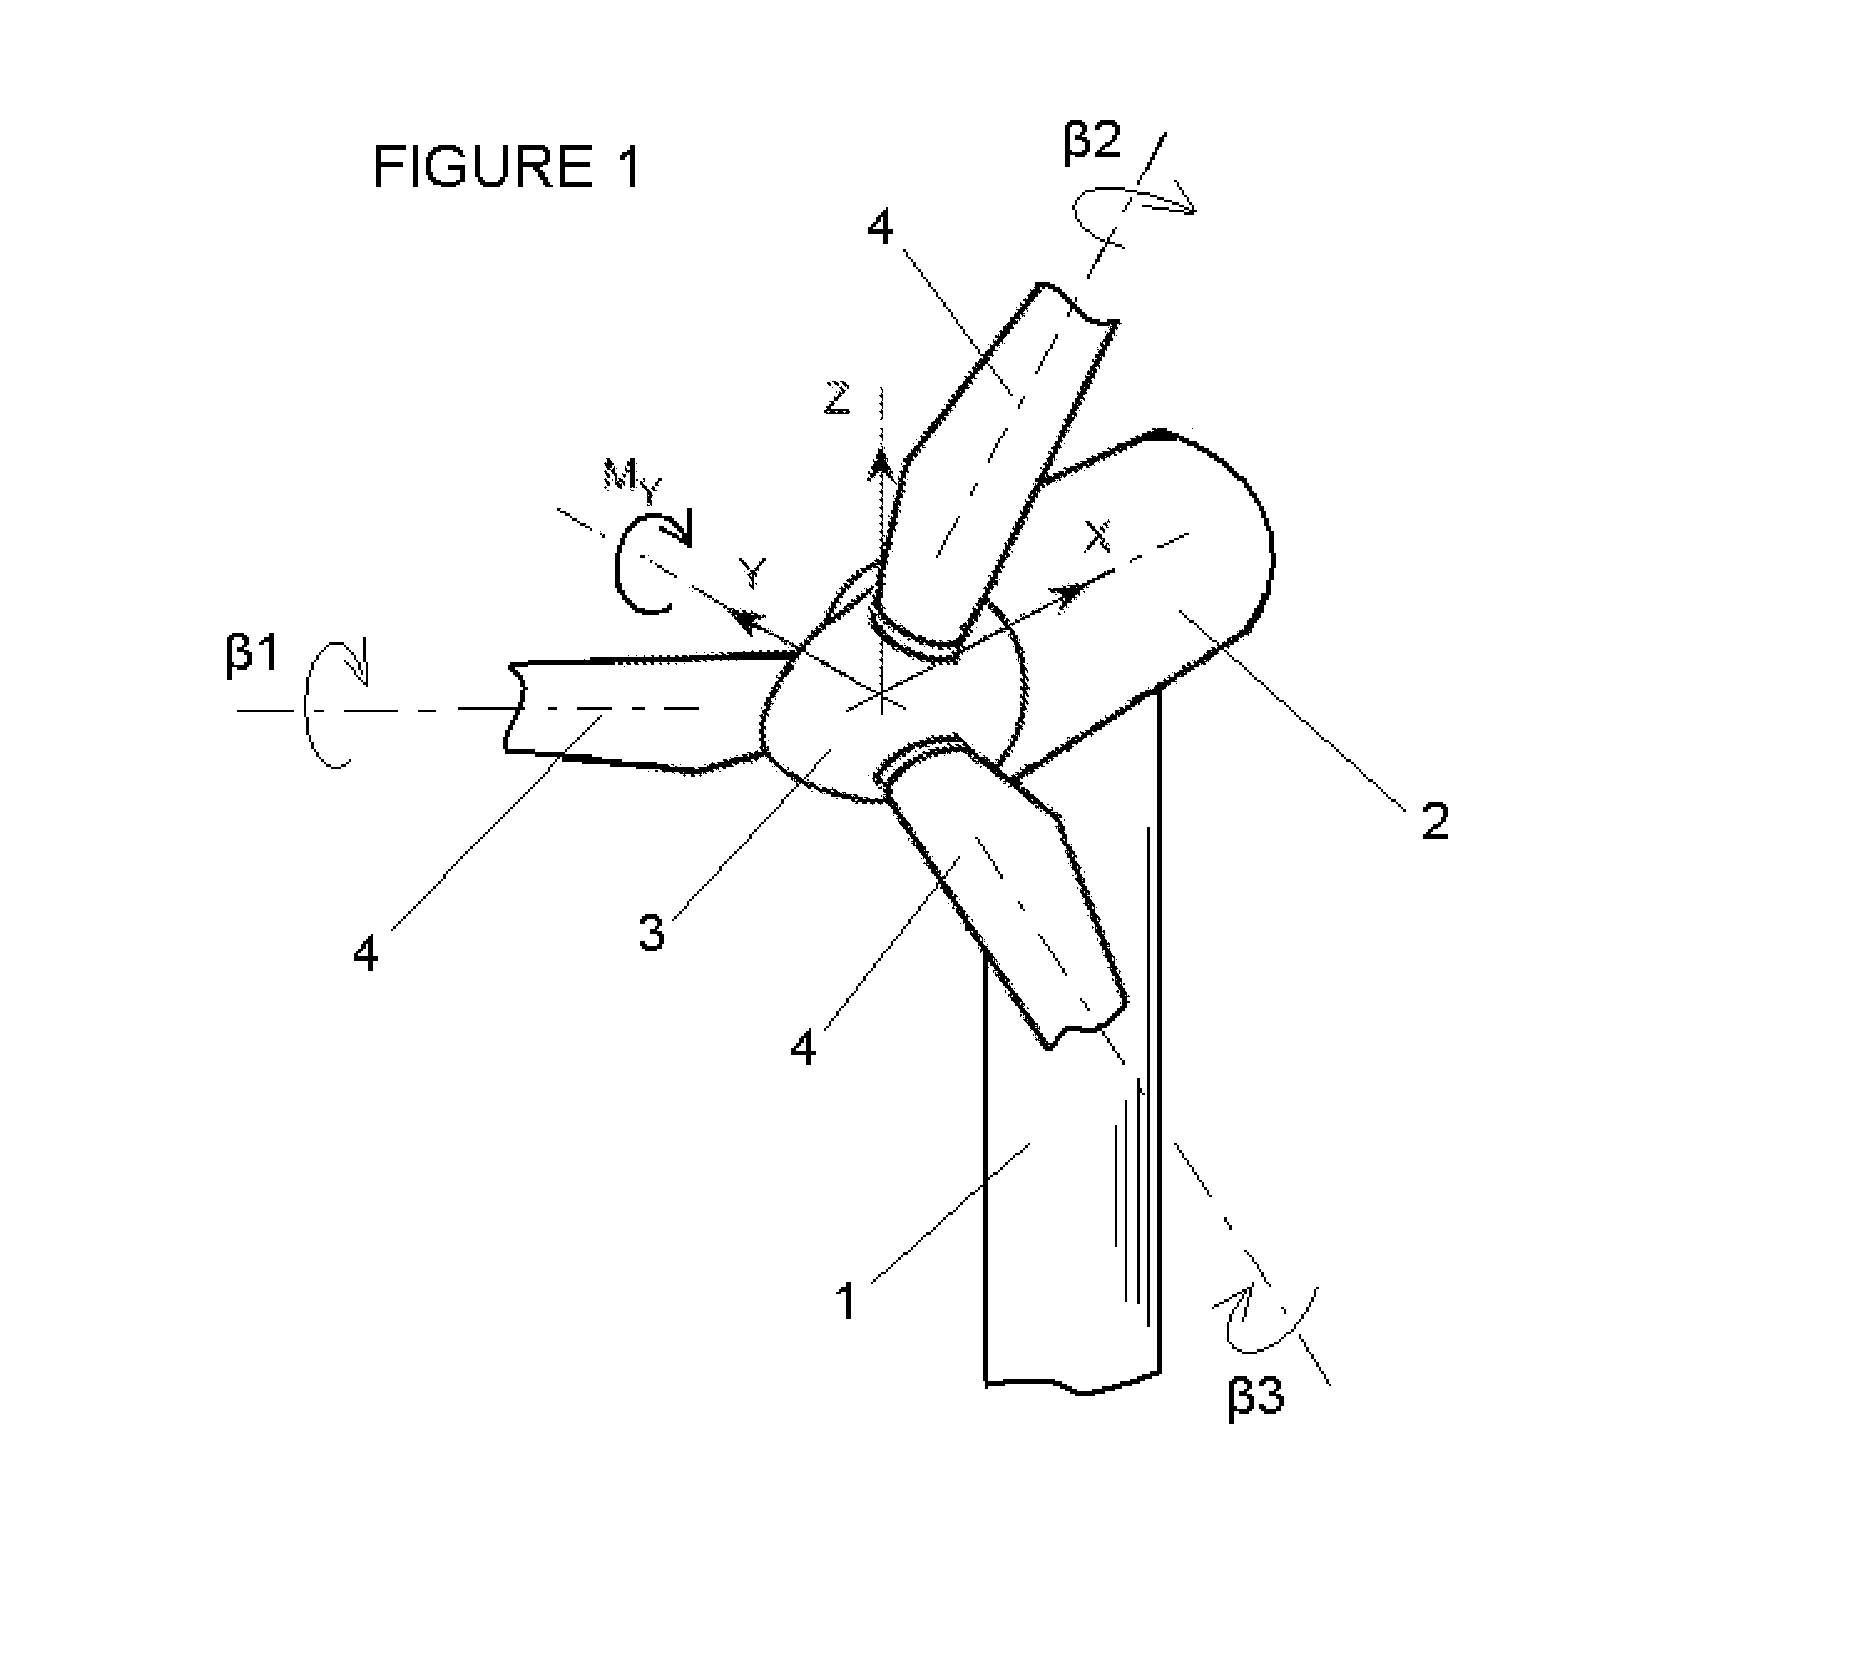 Method for dampening oscillations in a wind turbine